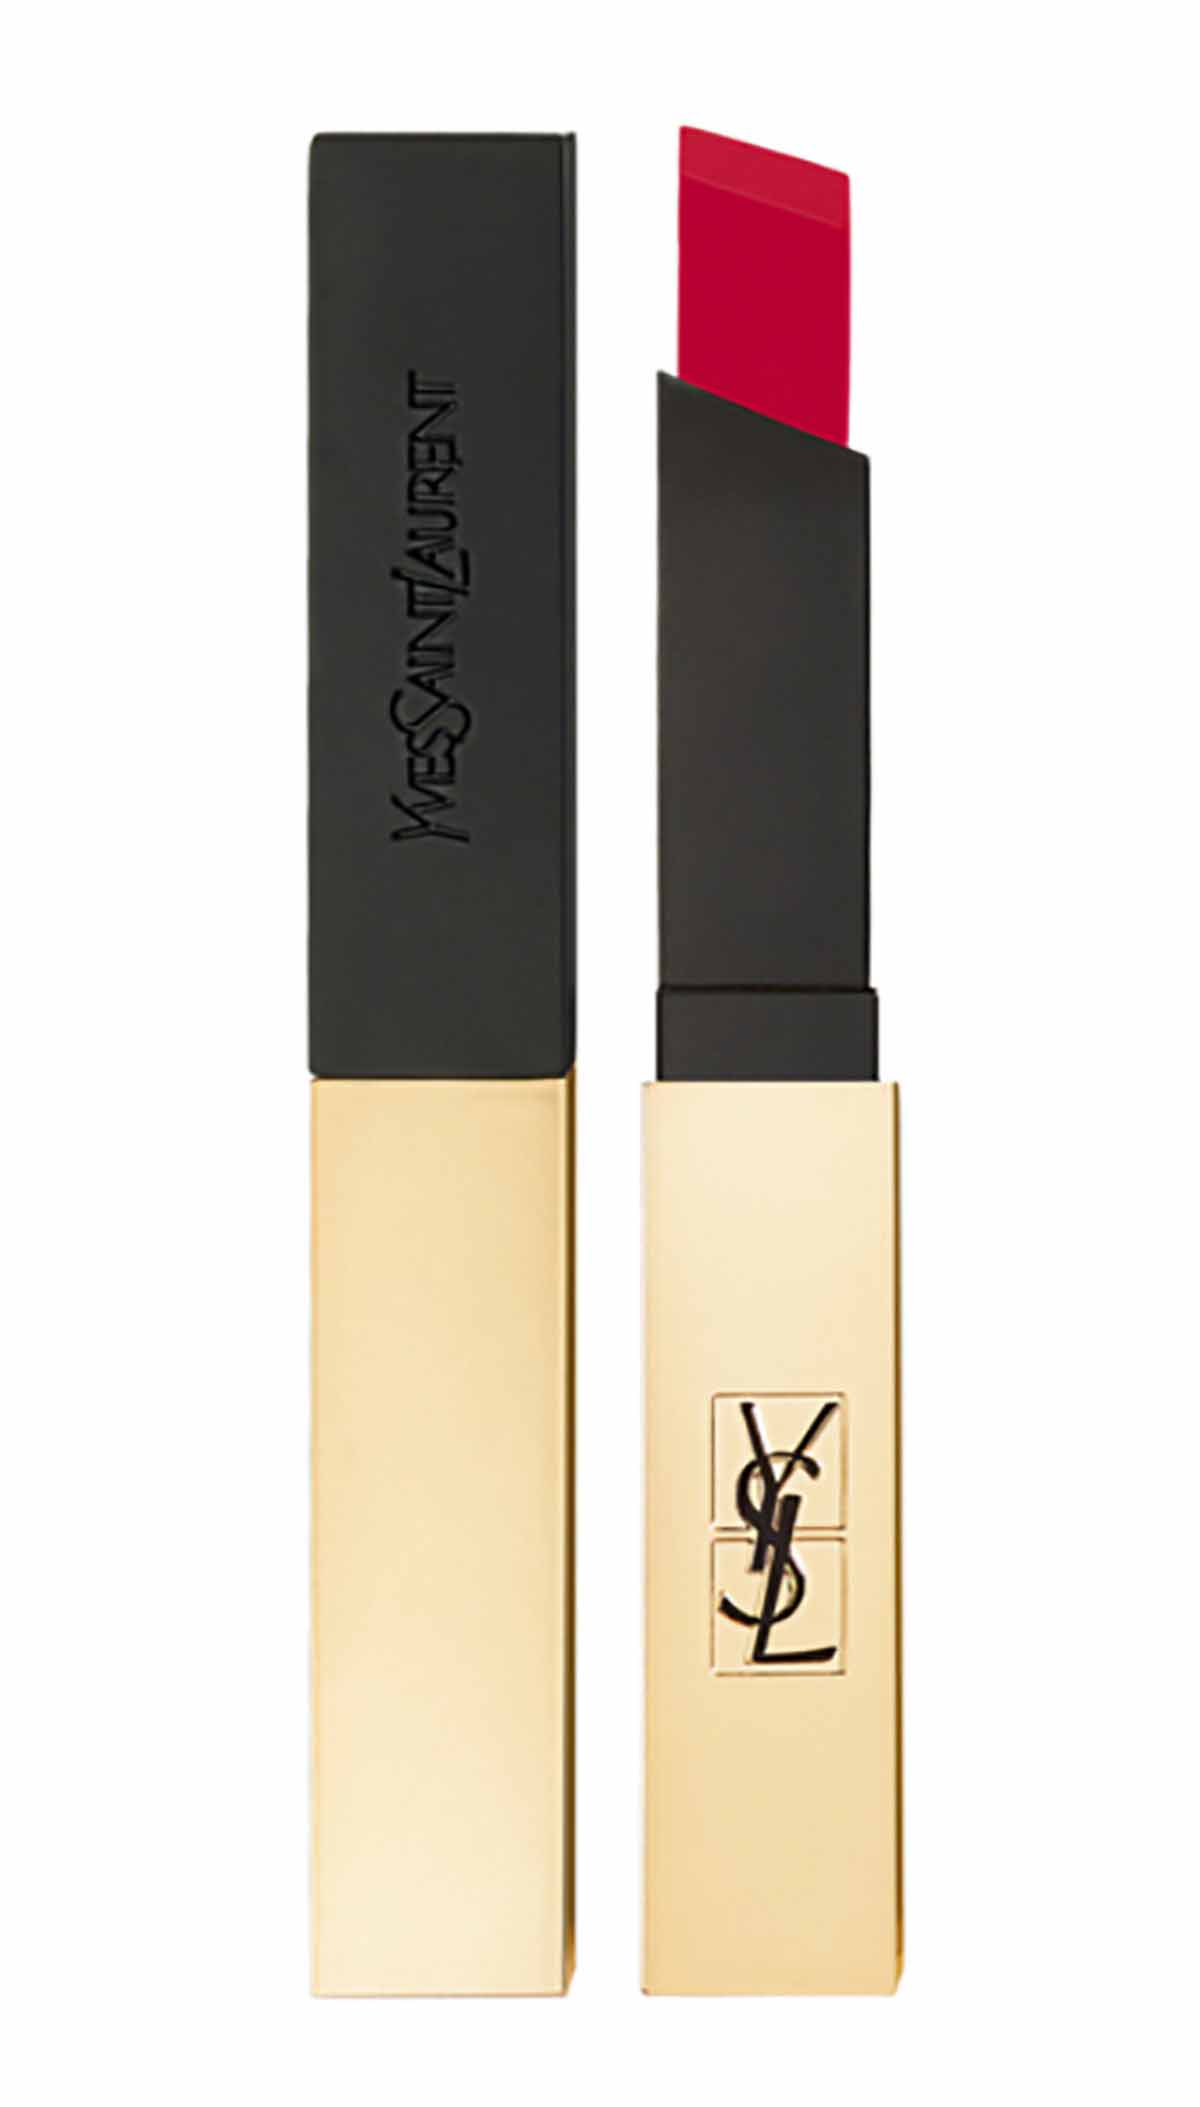 Rouge Pur Couture The Slim Yves Saint Laurent 33 euros